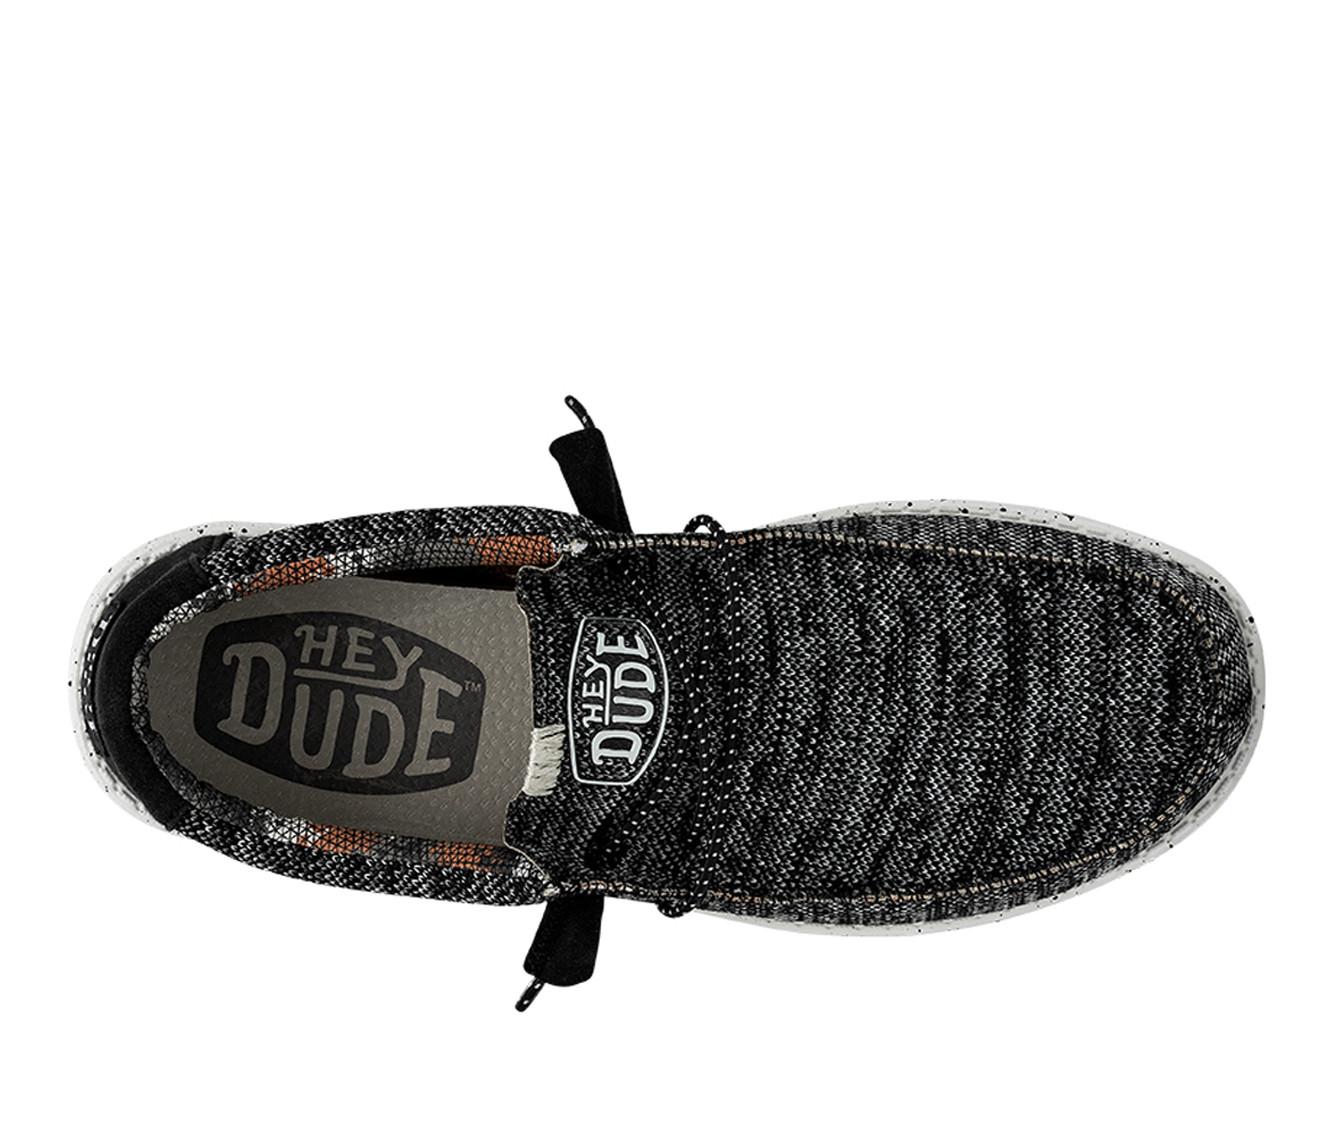 Men's HEYDUDE Wally Sox Stitch Casual Shoes